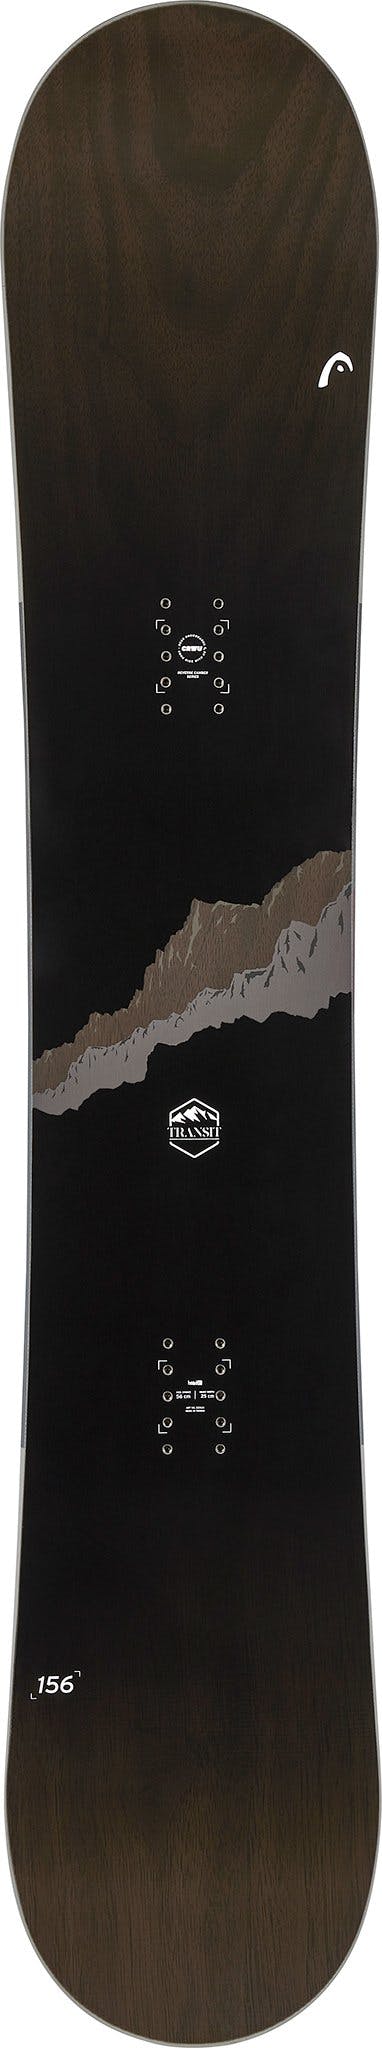 Product image for Transit Snowboard